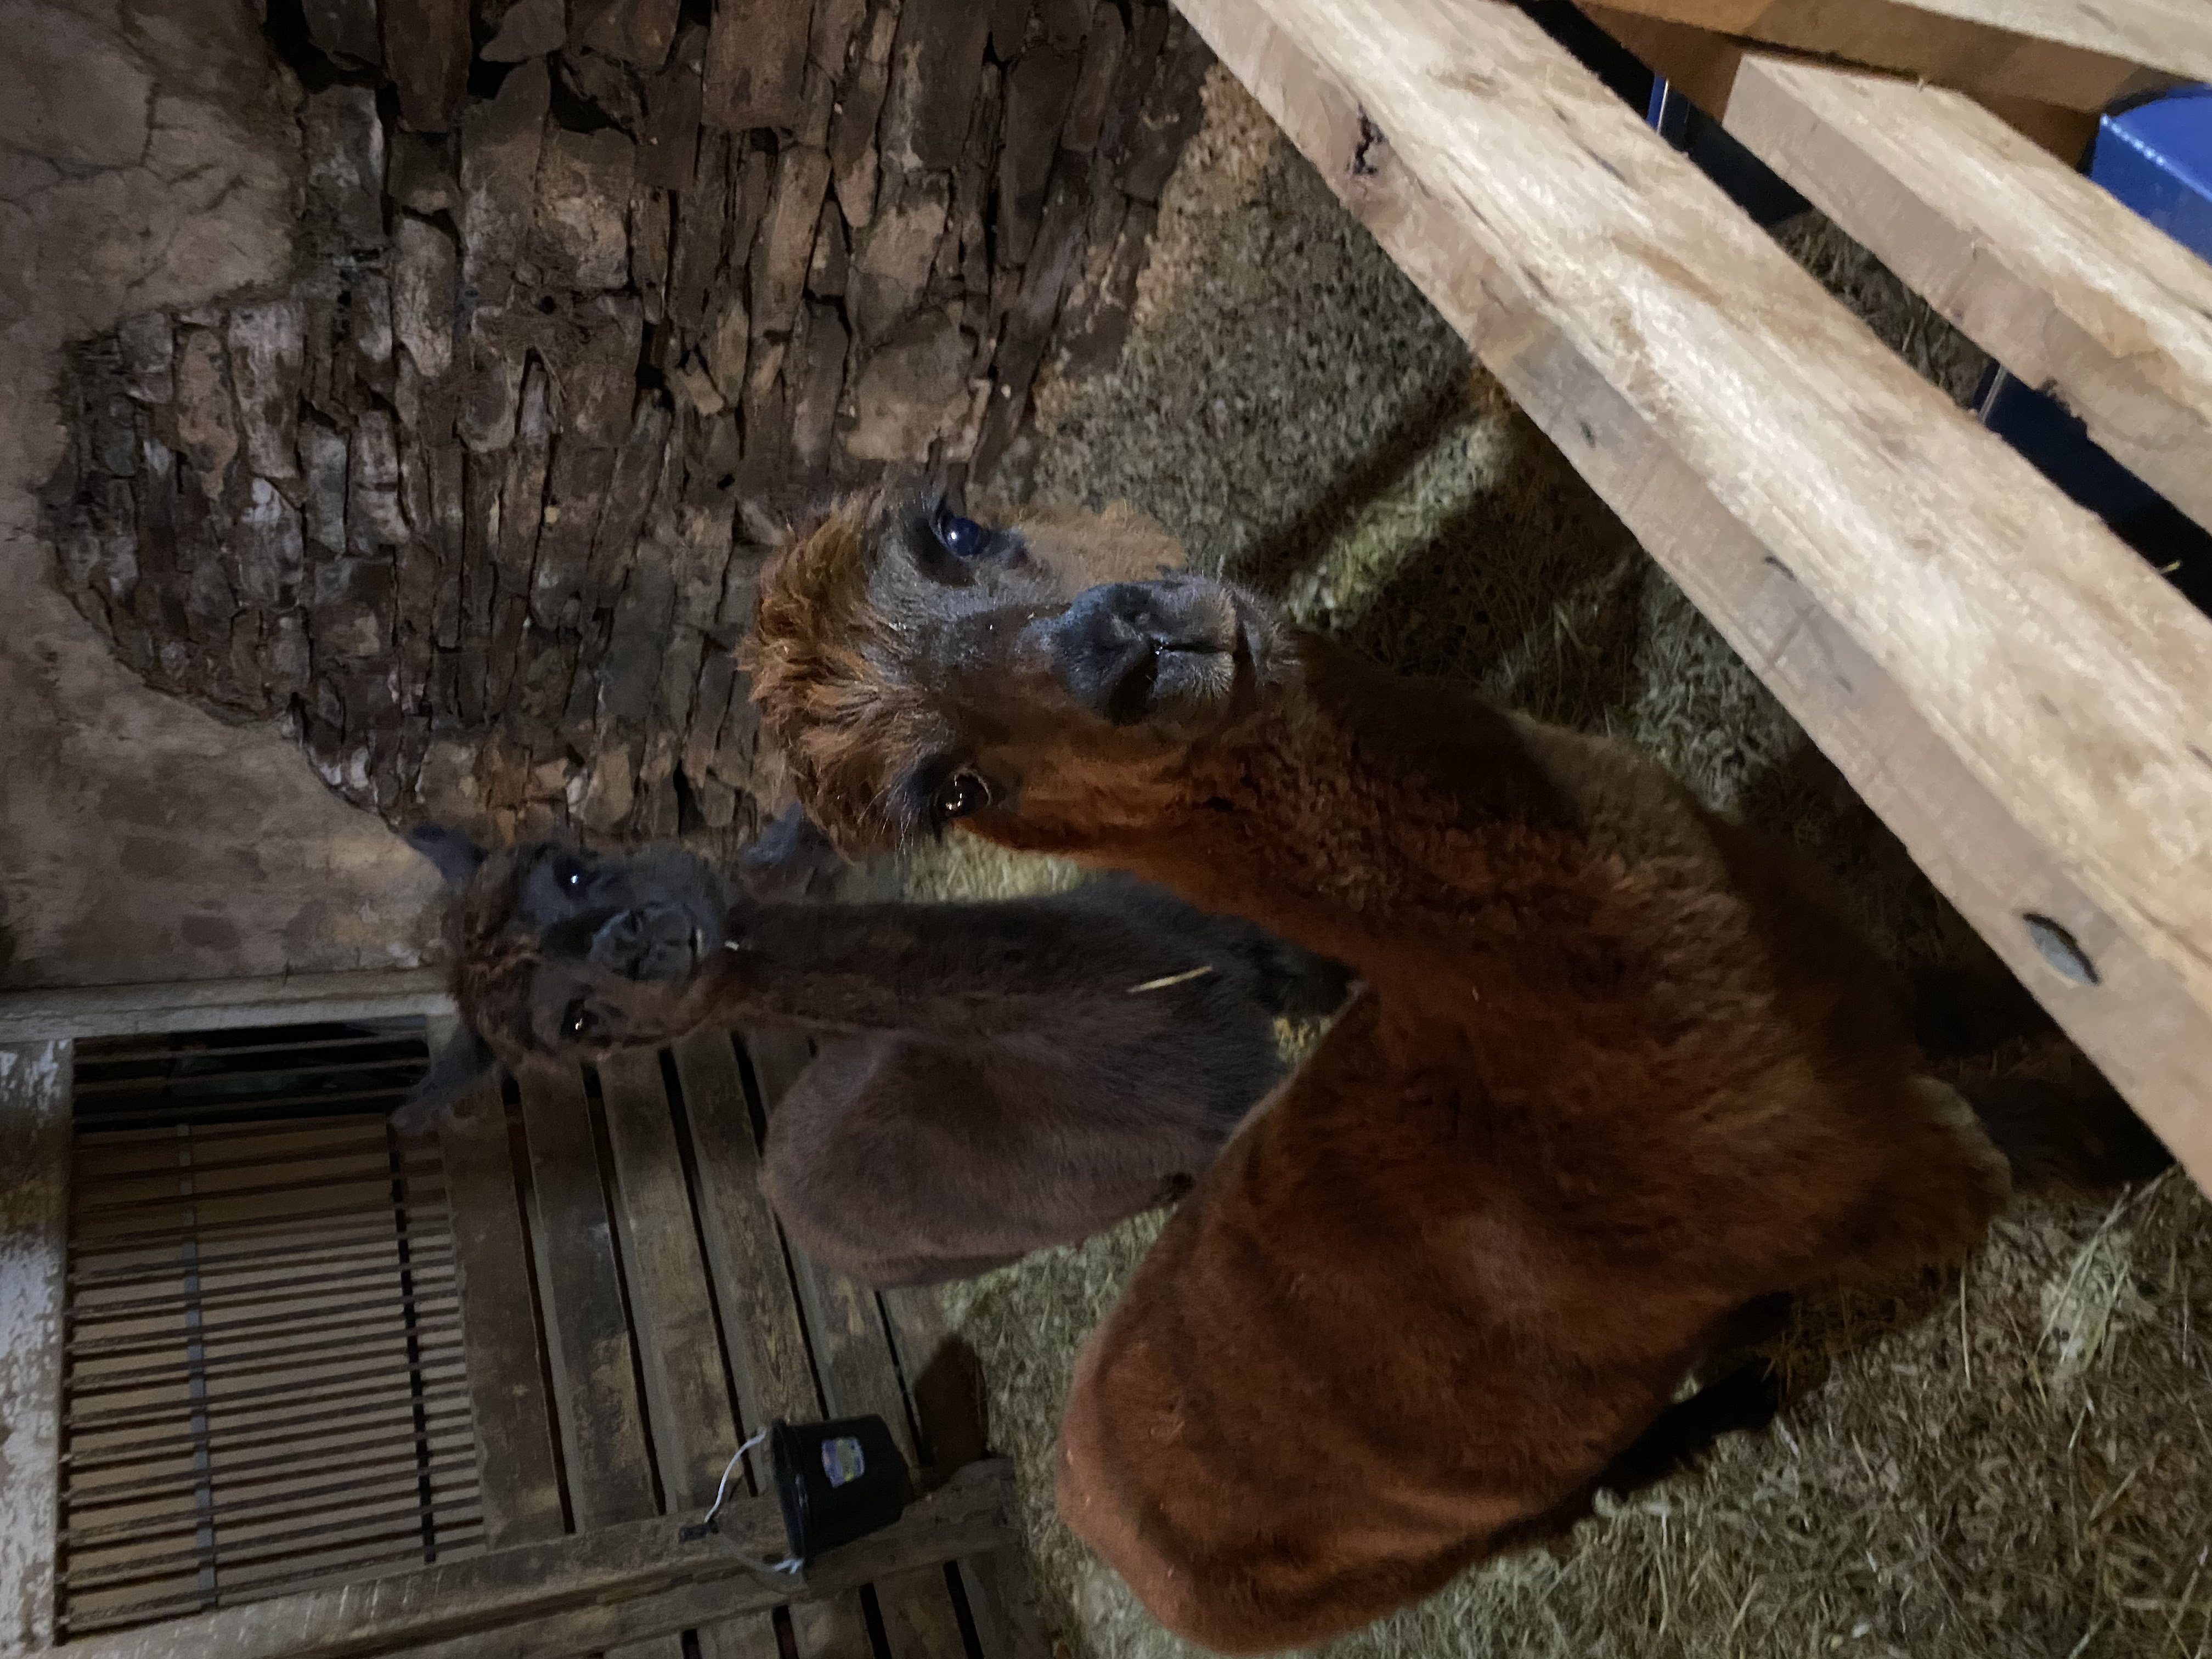 a brown alpaca and a black alpaca stand in their pen, looking curiously at the camera